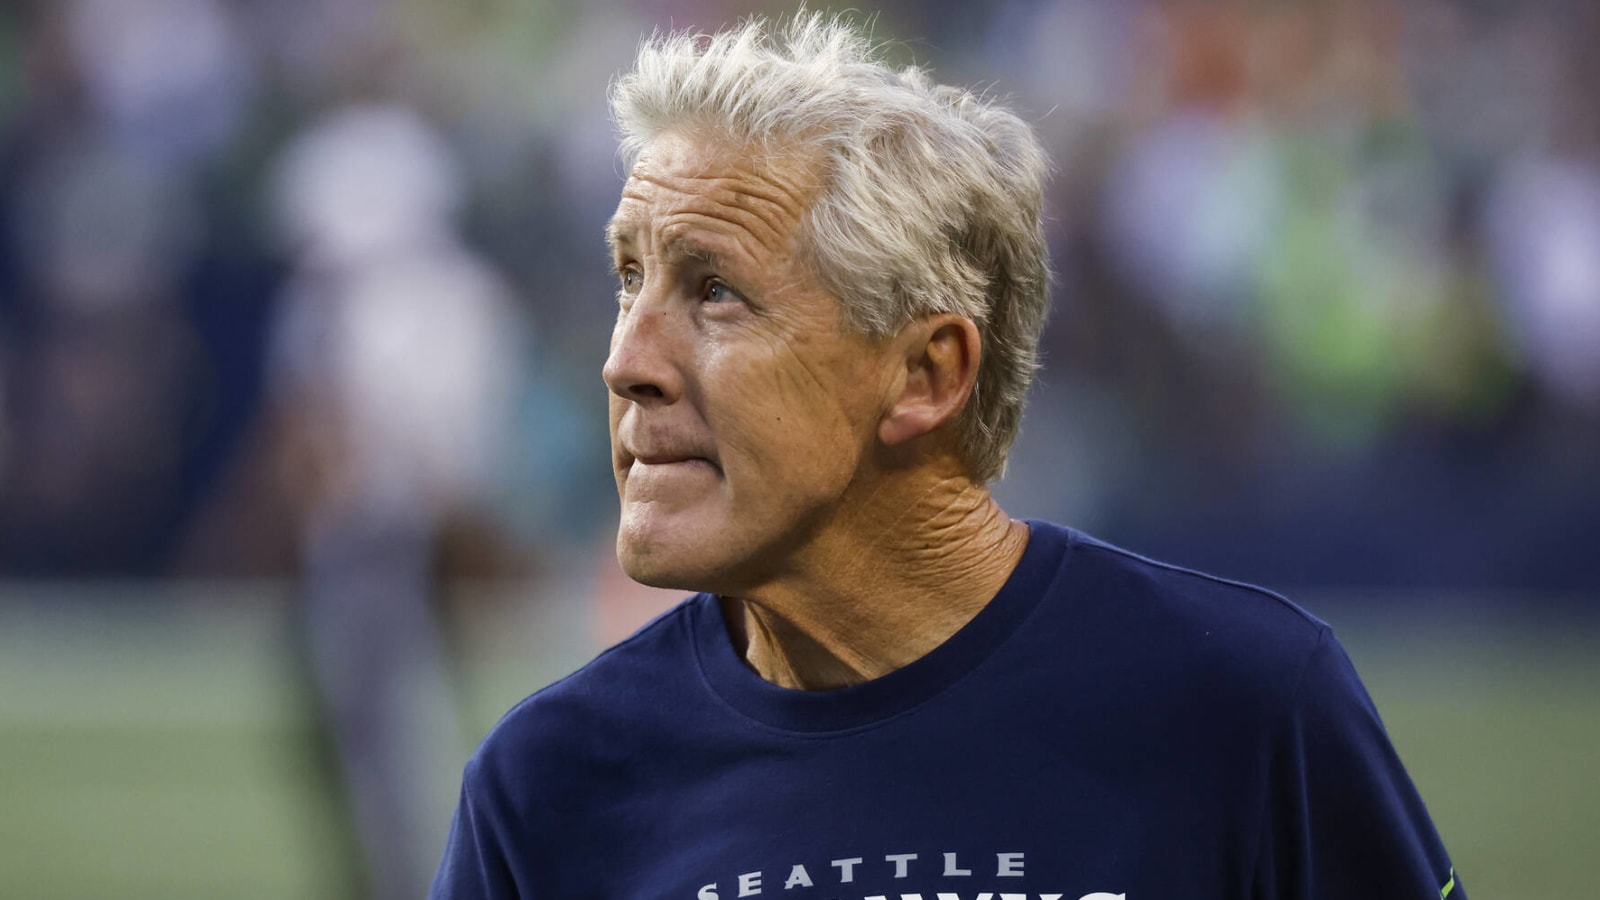 Pete Carroll shares part of plan to slow Russell Wilson